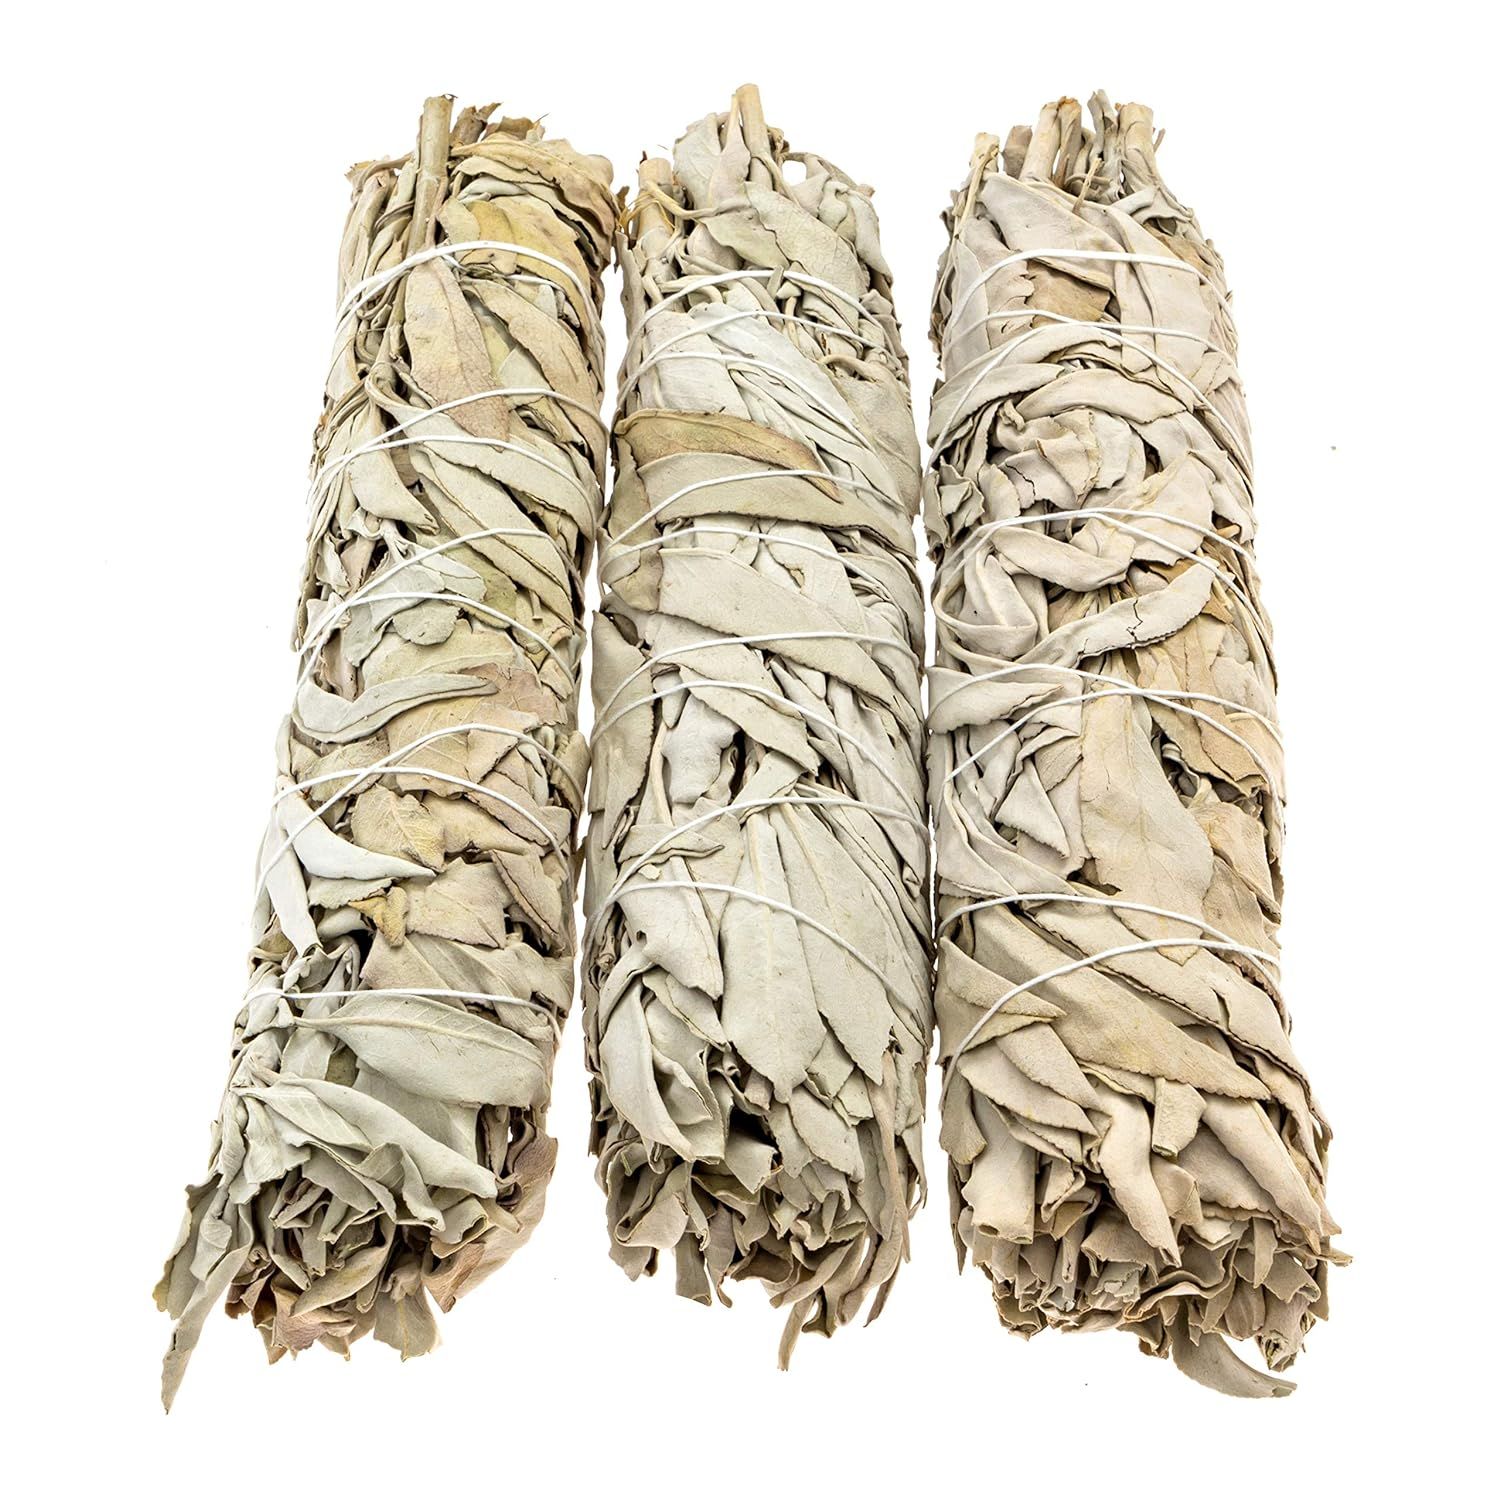 8"+ Large California White Sage, Each Stick Approximately 8 Inches Long and 1.25 Inches Wide for ... | Amazon (US)